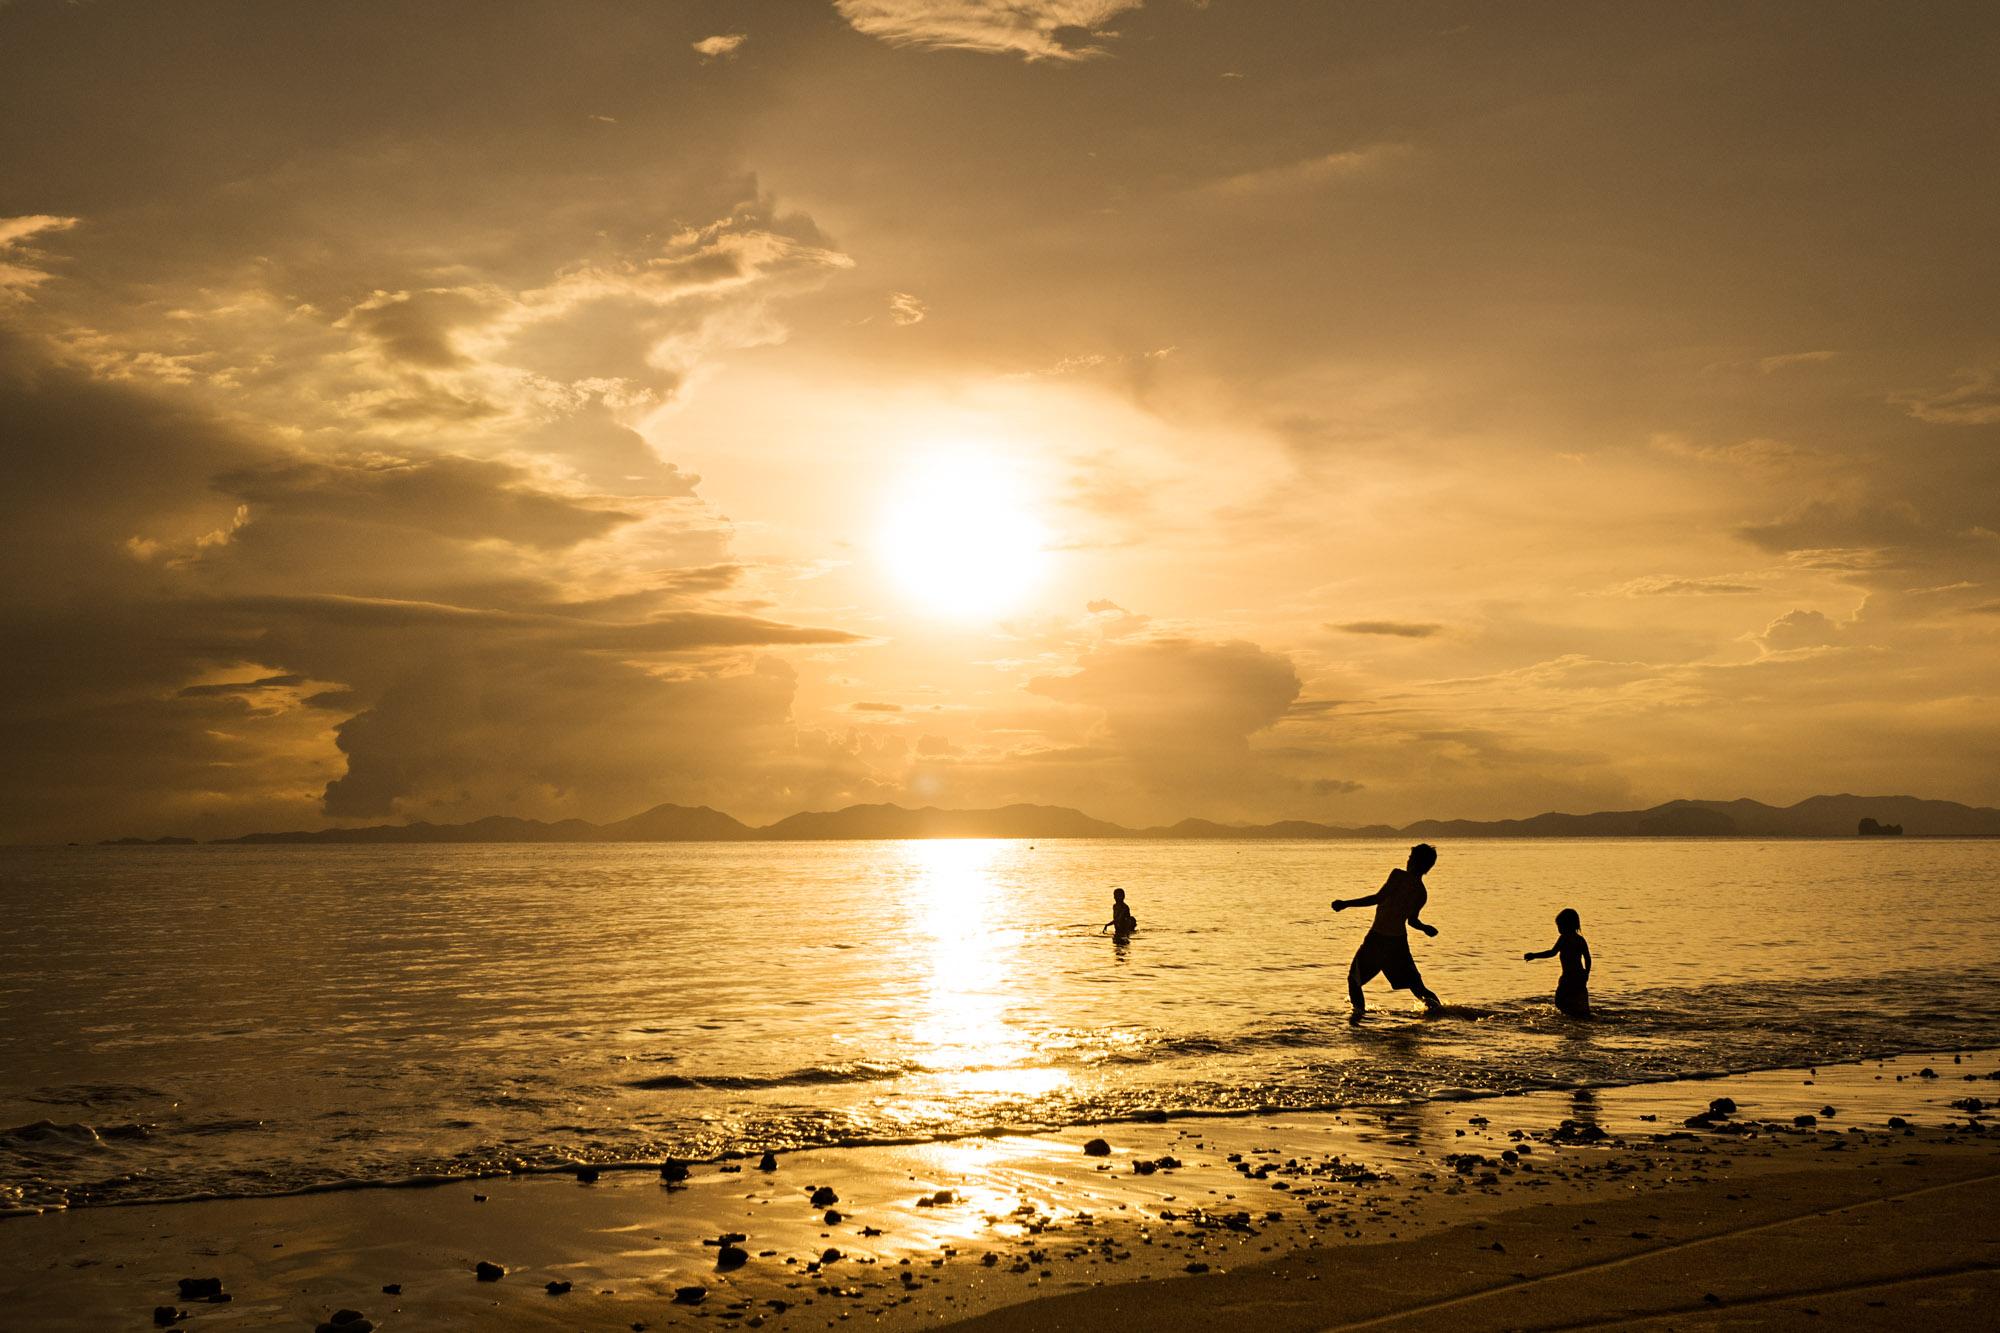 Travel - A father plays with his children in the ocean at sunset...